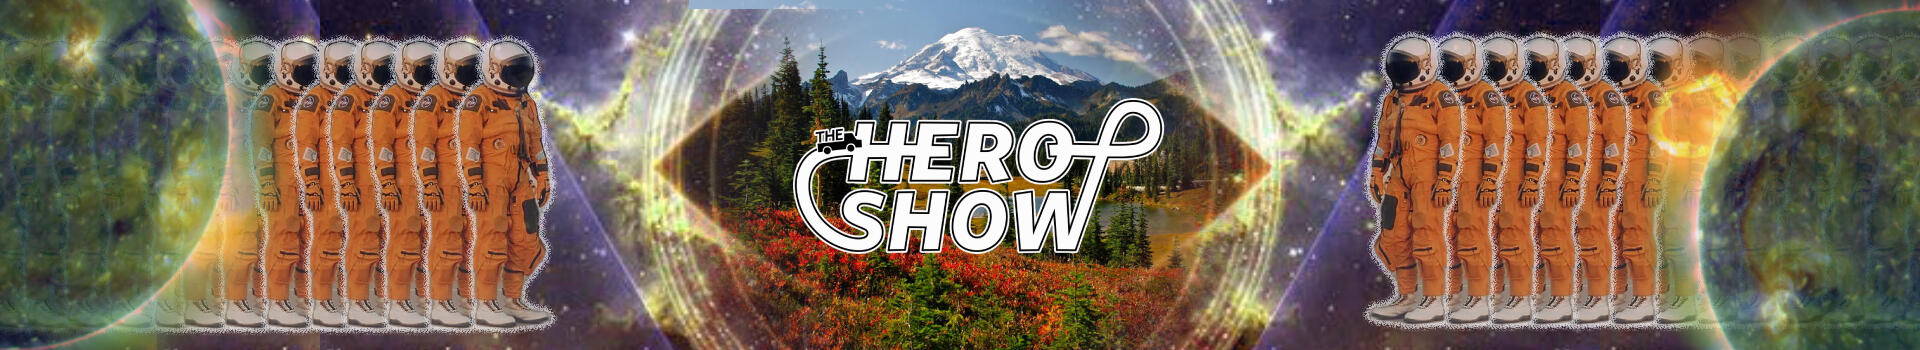 The Hero Show Banner 350